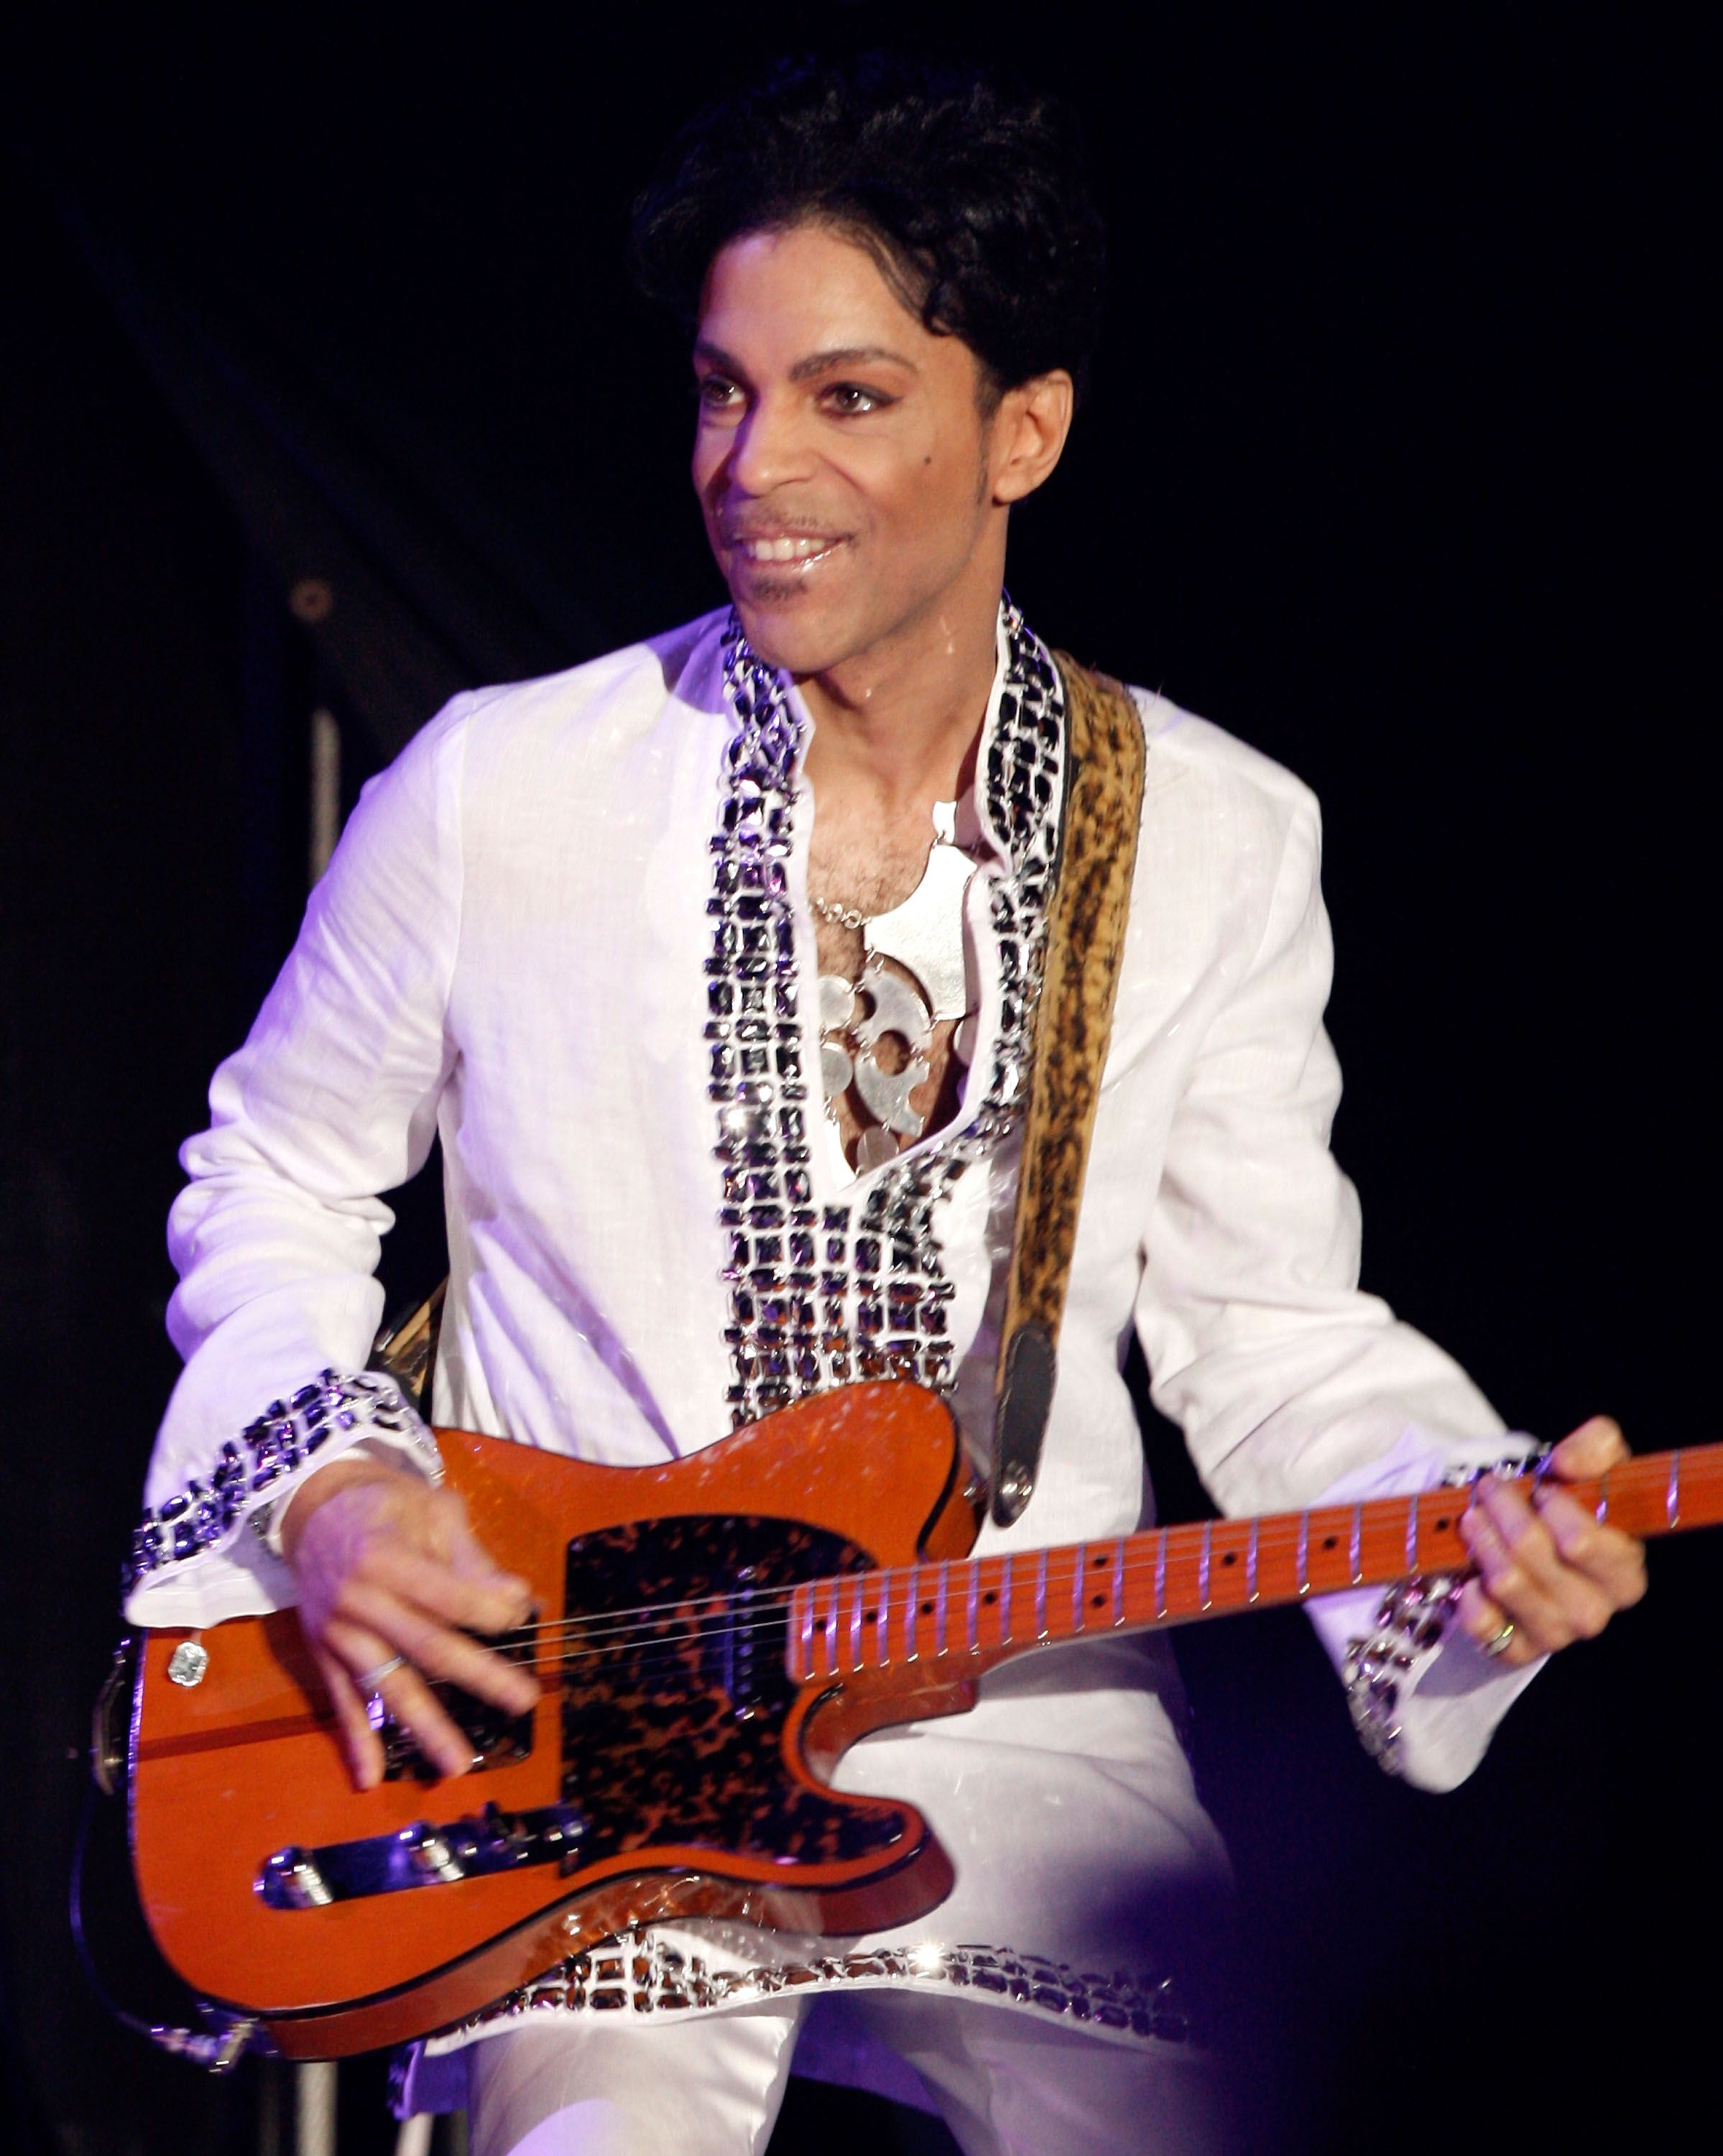 Prince performing at the Coachella Valley Music and Arts Festival on April 26, 2008, in Indio, California | Photo: Getty Images